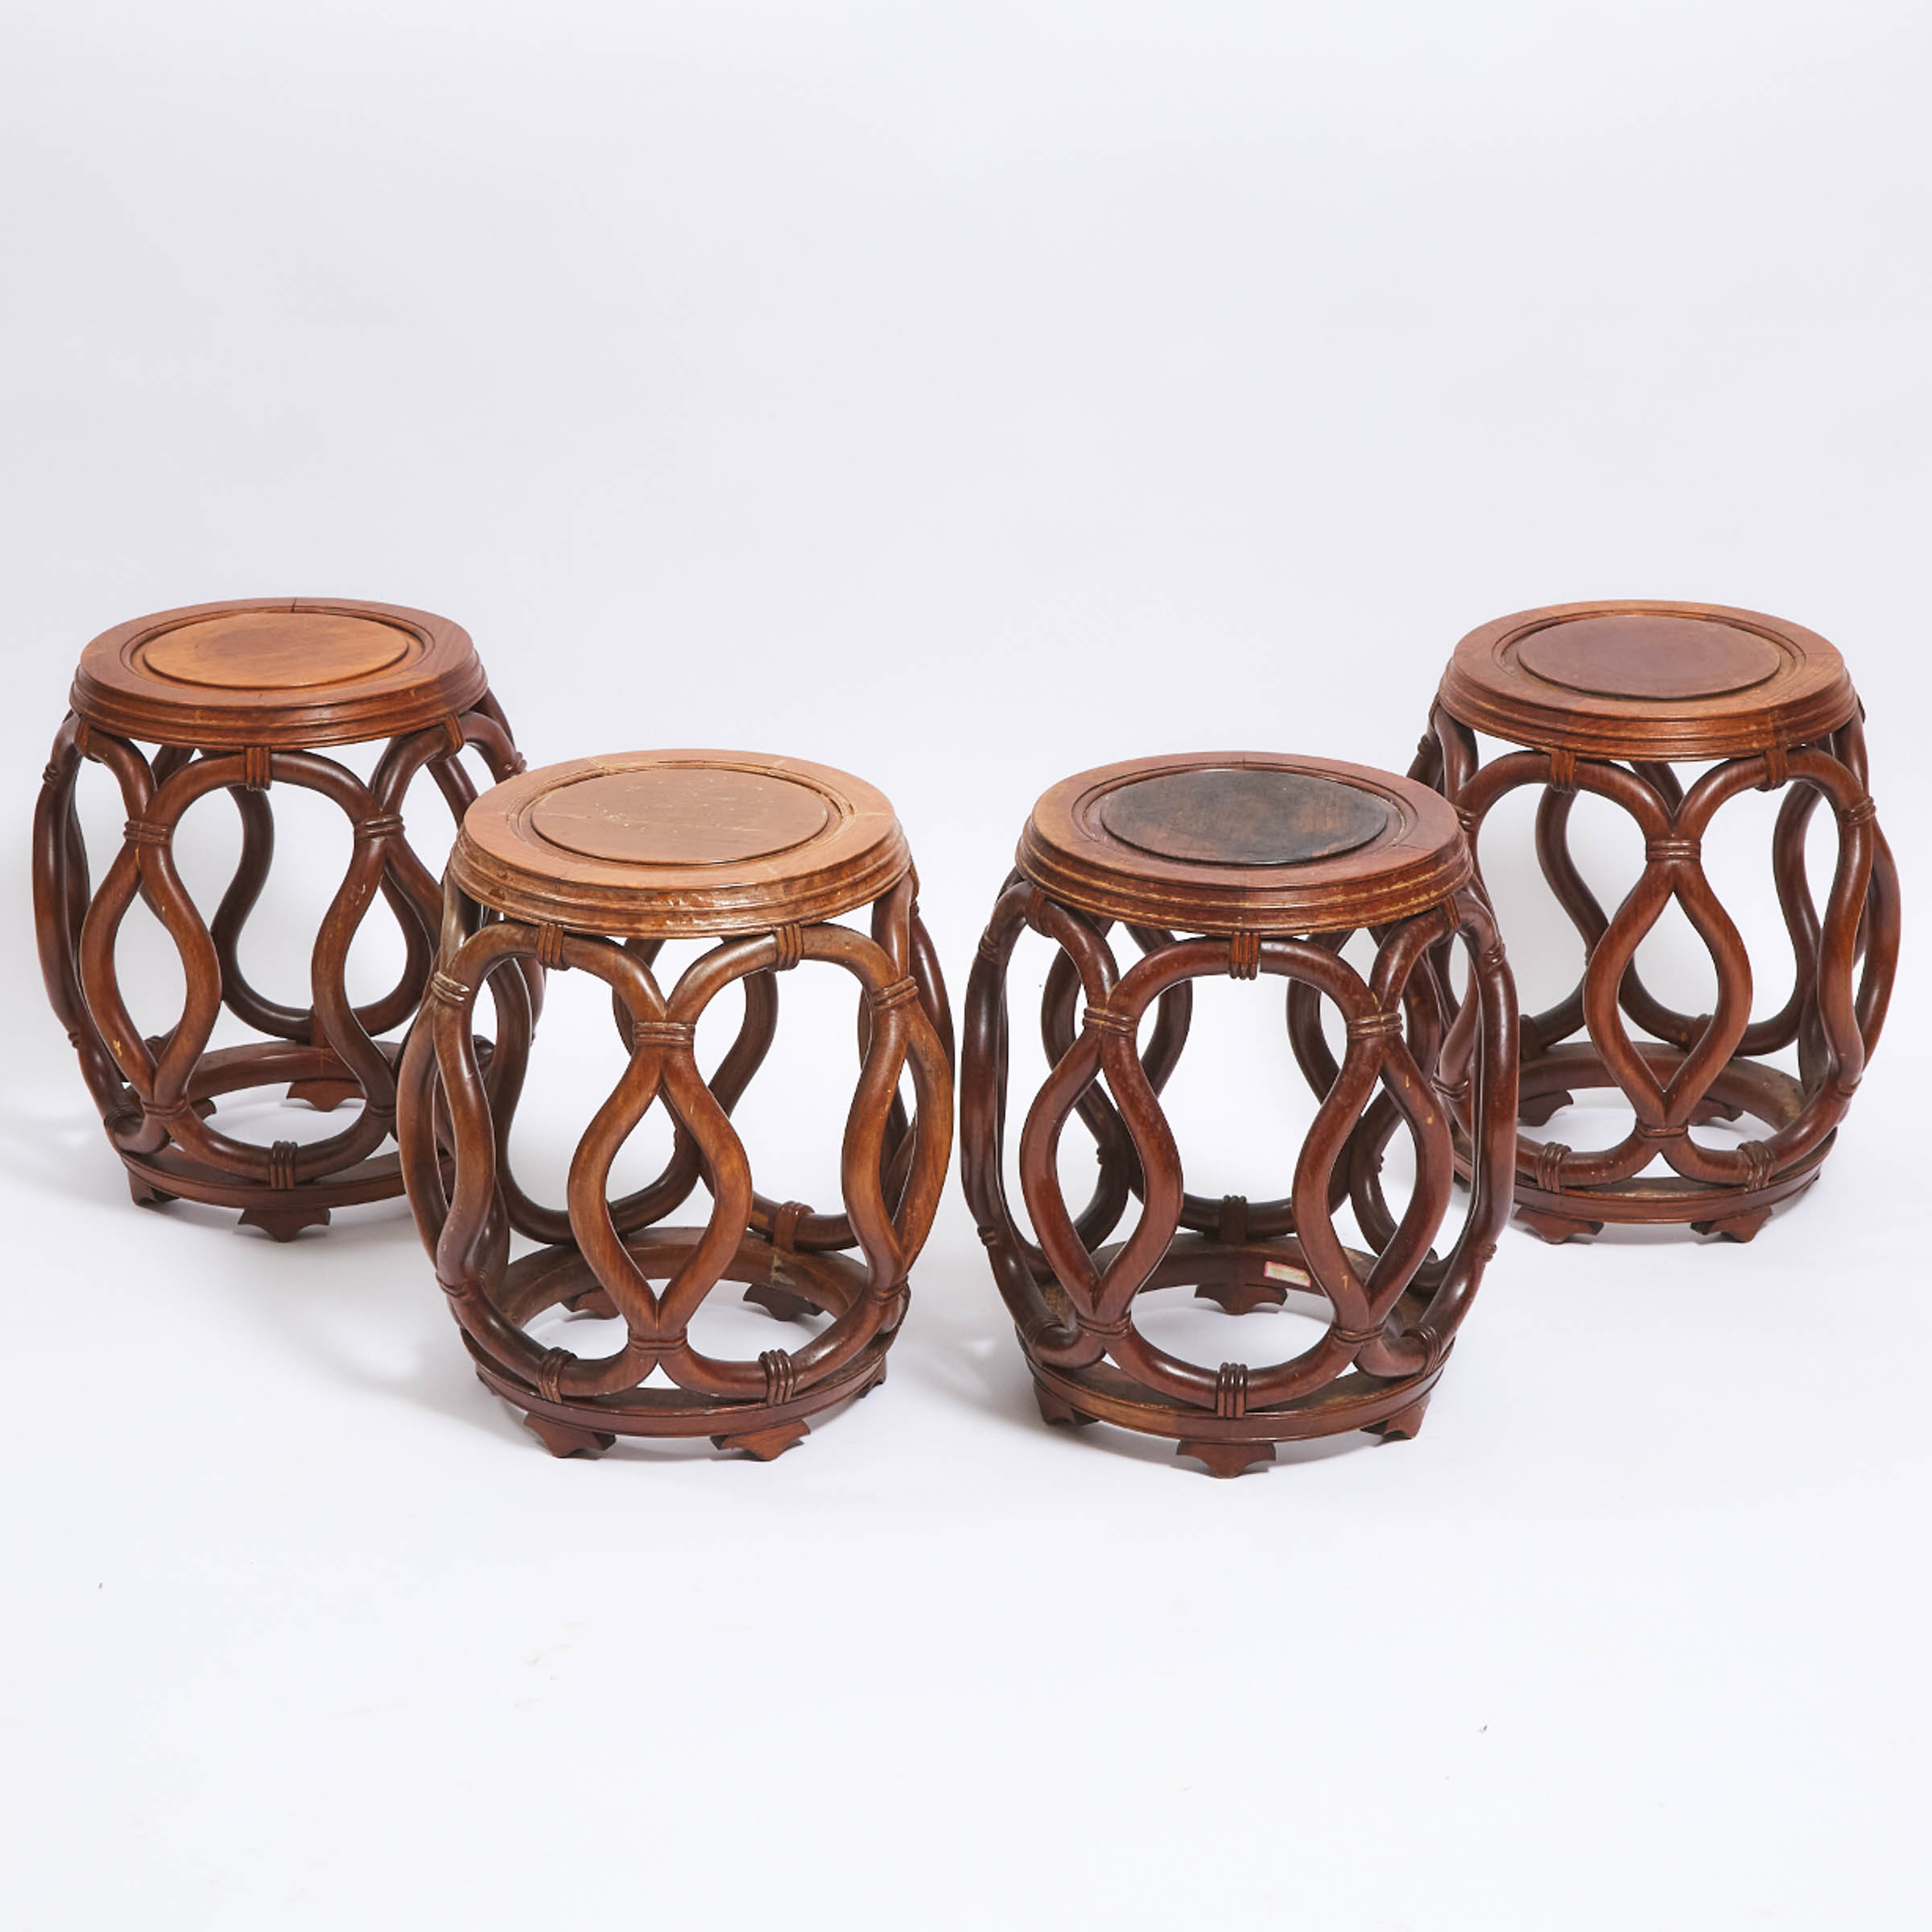 A Set of Four Chinese Ming-Style Hardwood Barrel Stools, Republican Period (1912-1949)